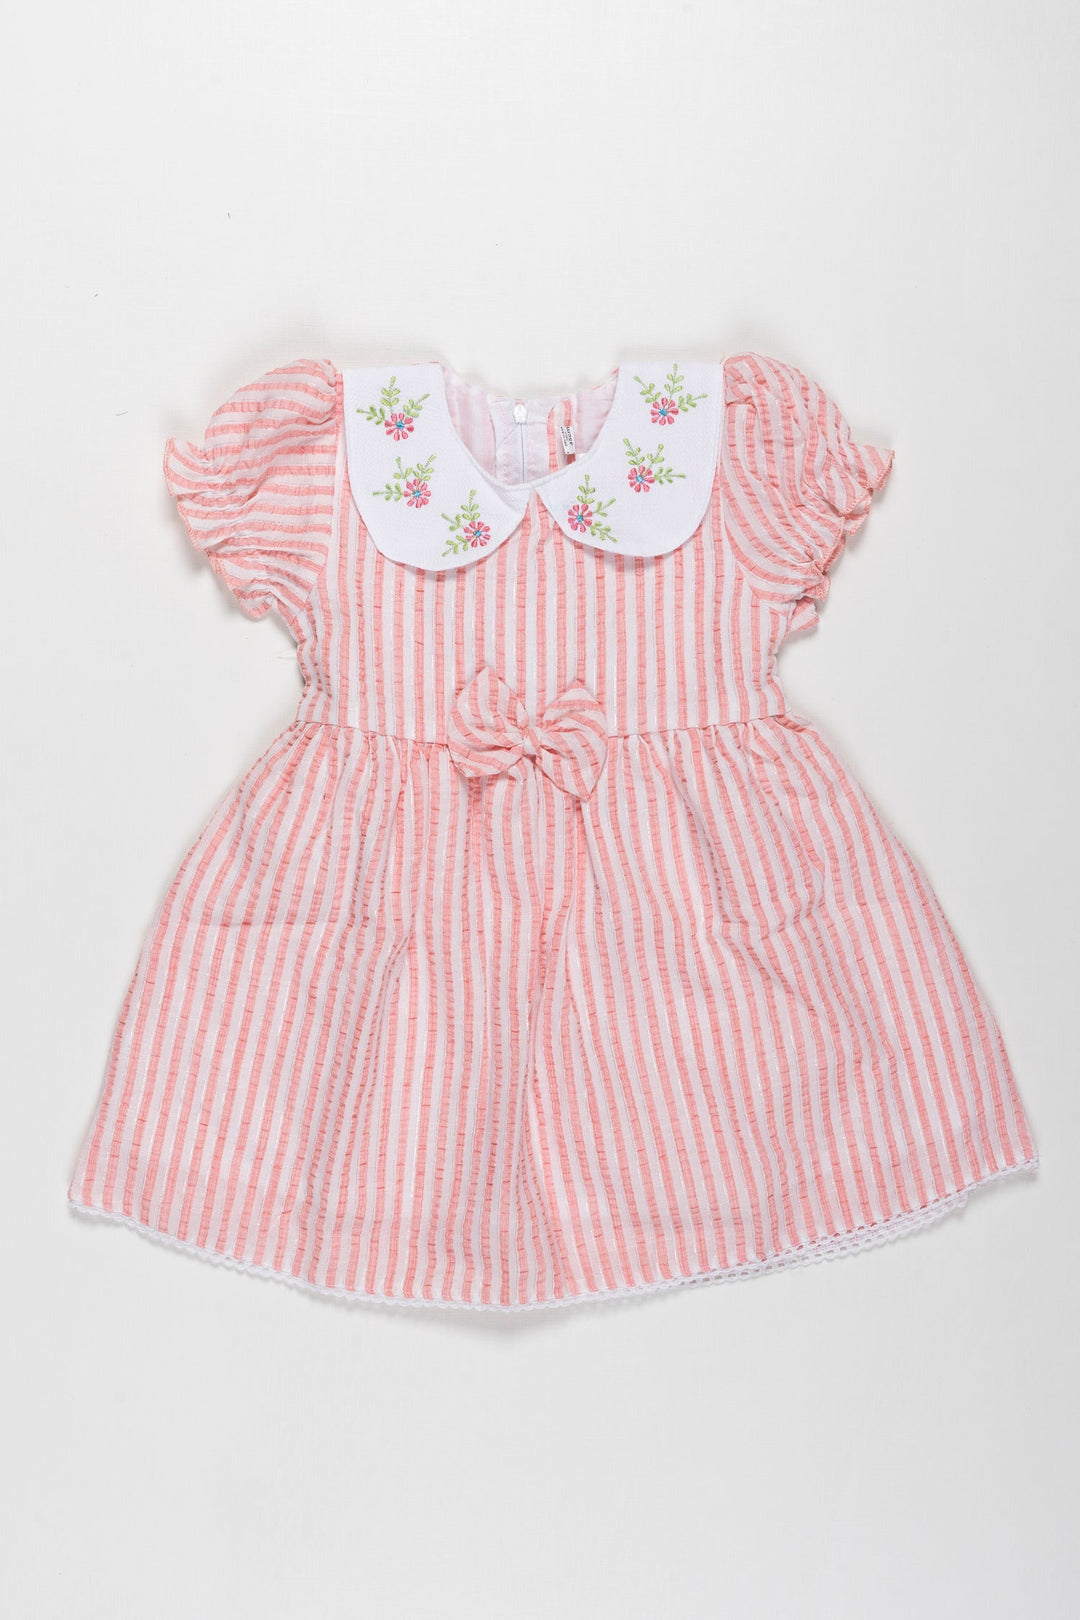 The Nesavu Baby Cotton Frocks Candy Stripe Whisper Frock with Embroidered Peter Pan Collar for Baby Girls Nesavu 14 (6M) / Pink / Cotton BFJ529B-14 Embroidered Collar Baby Girl Frock in Candy Stripes | Unique Summer Wear | The Nesavu